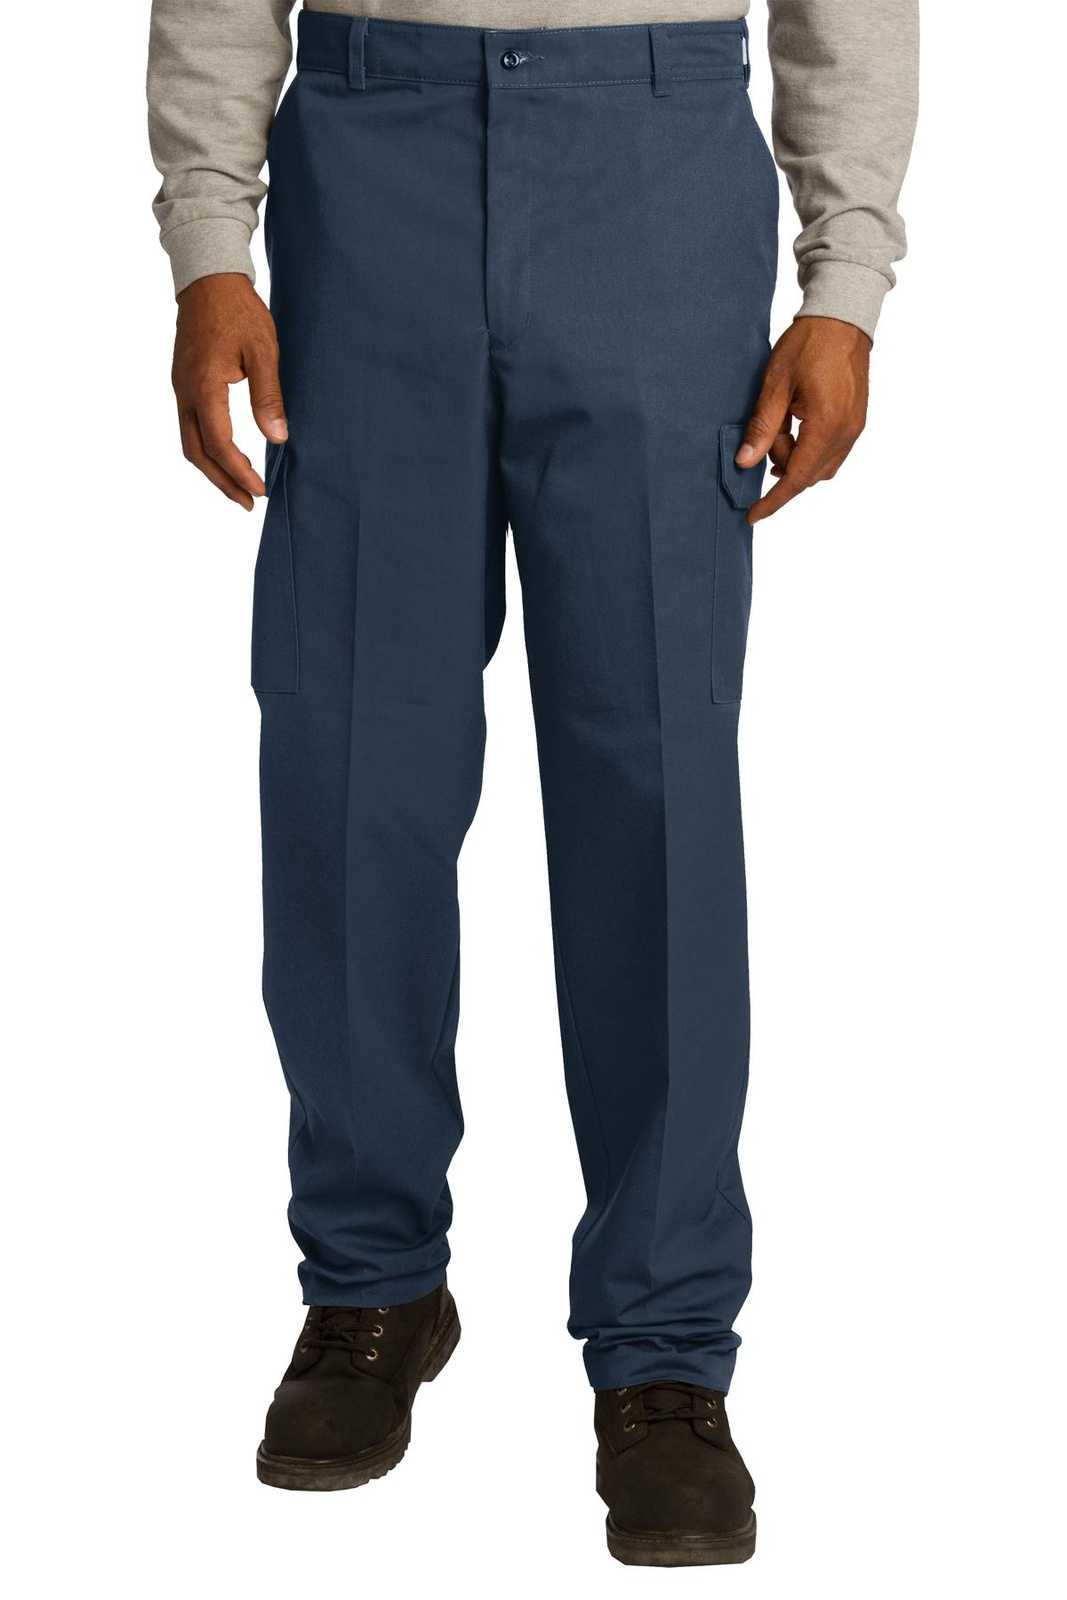 Red Kap PT88 Industrial Cargo Pant - Navy - HIT a Double - 1